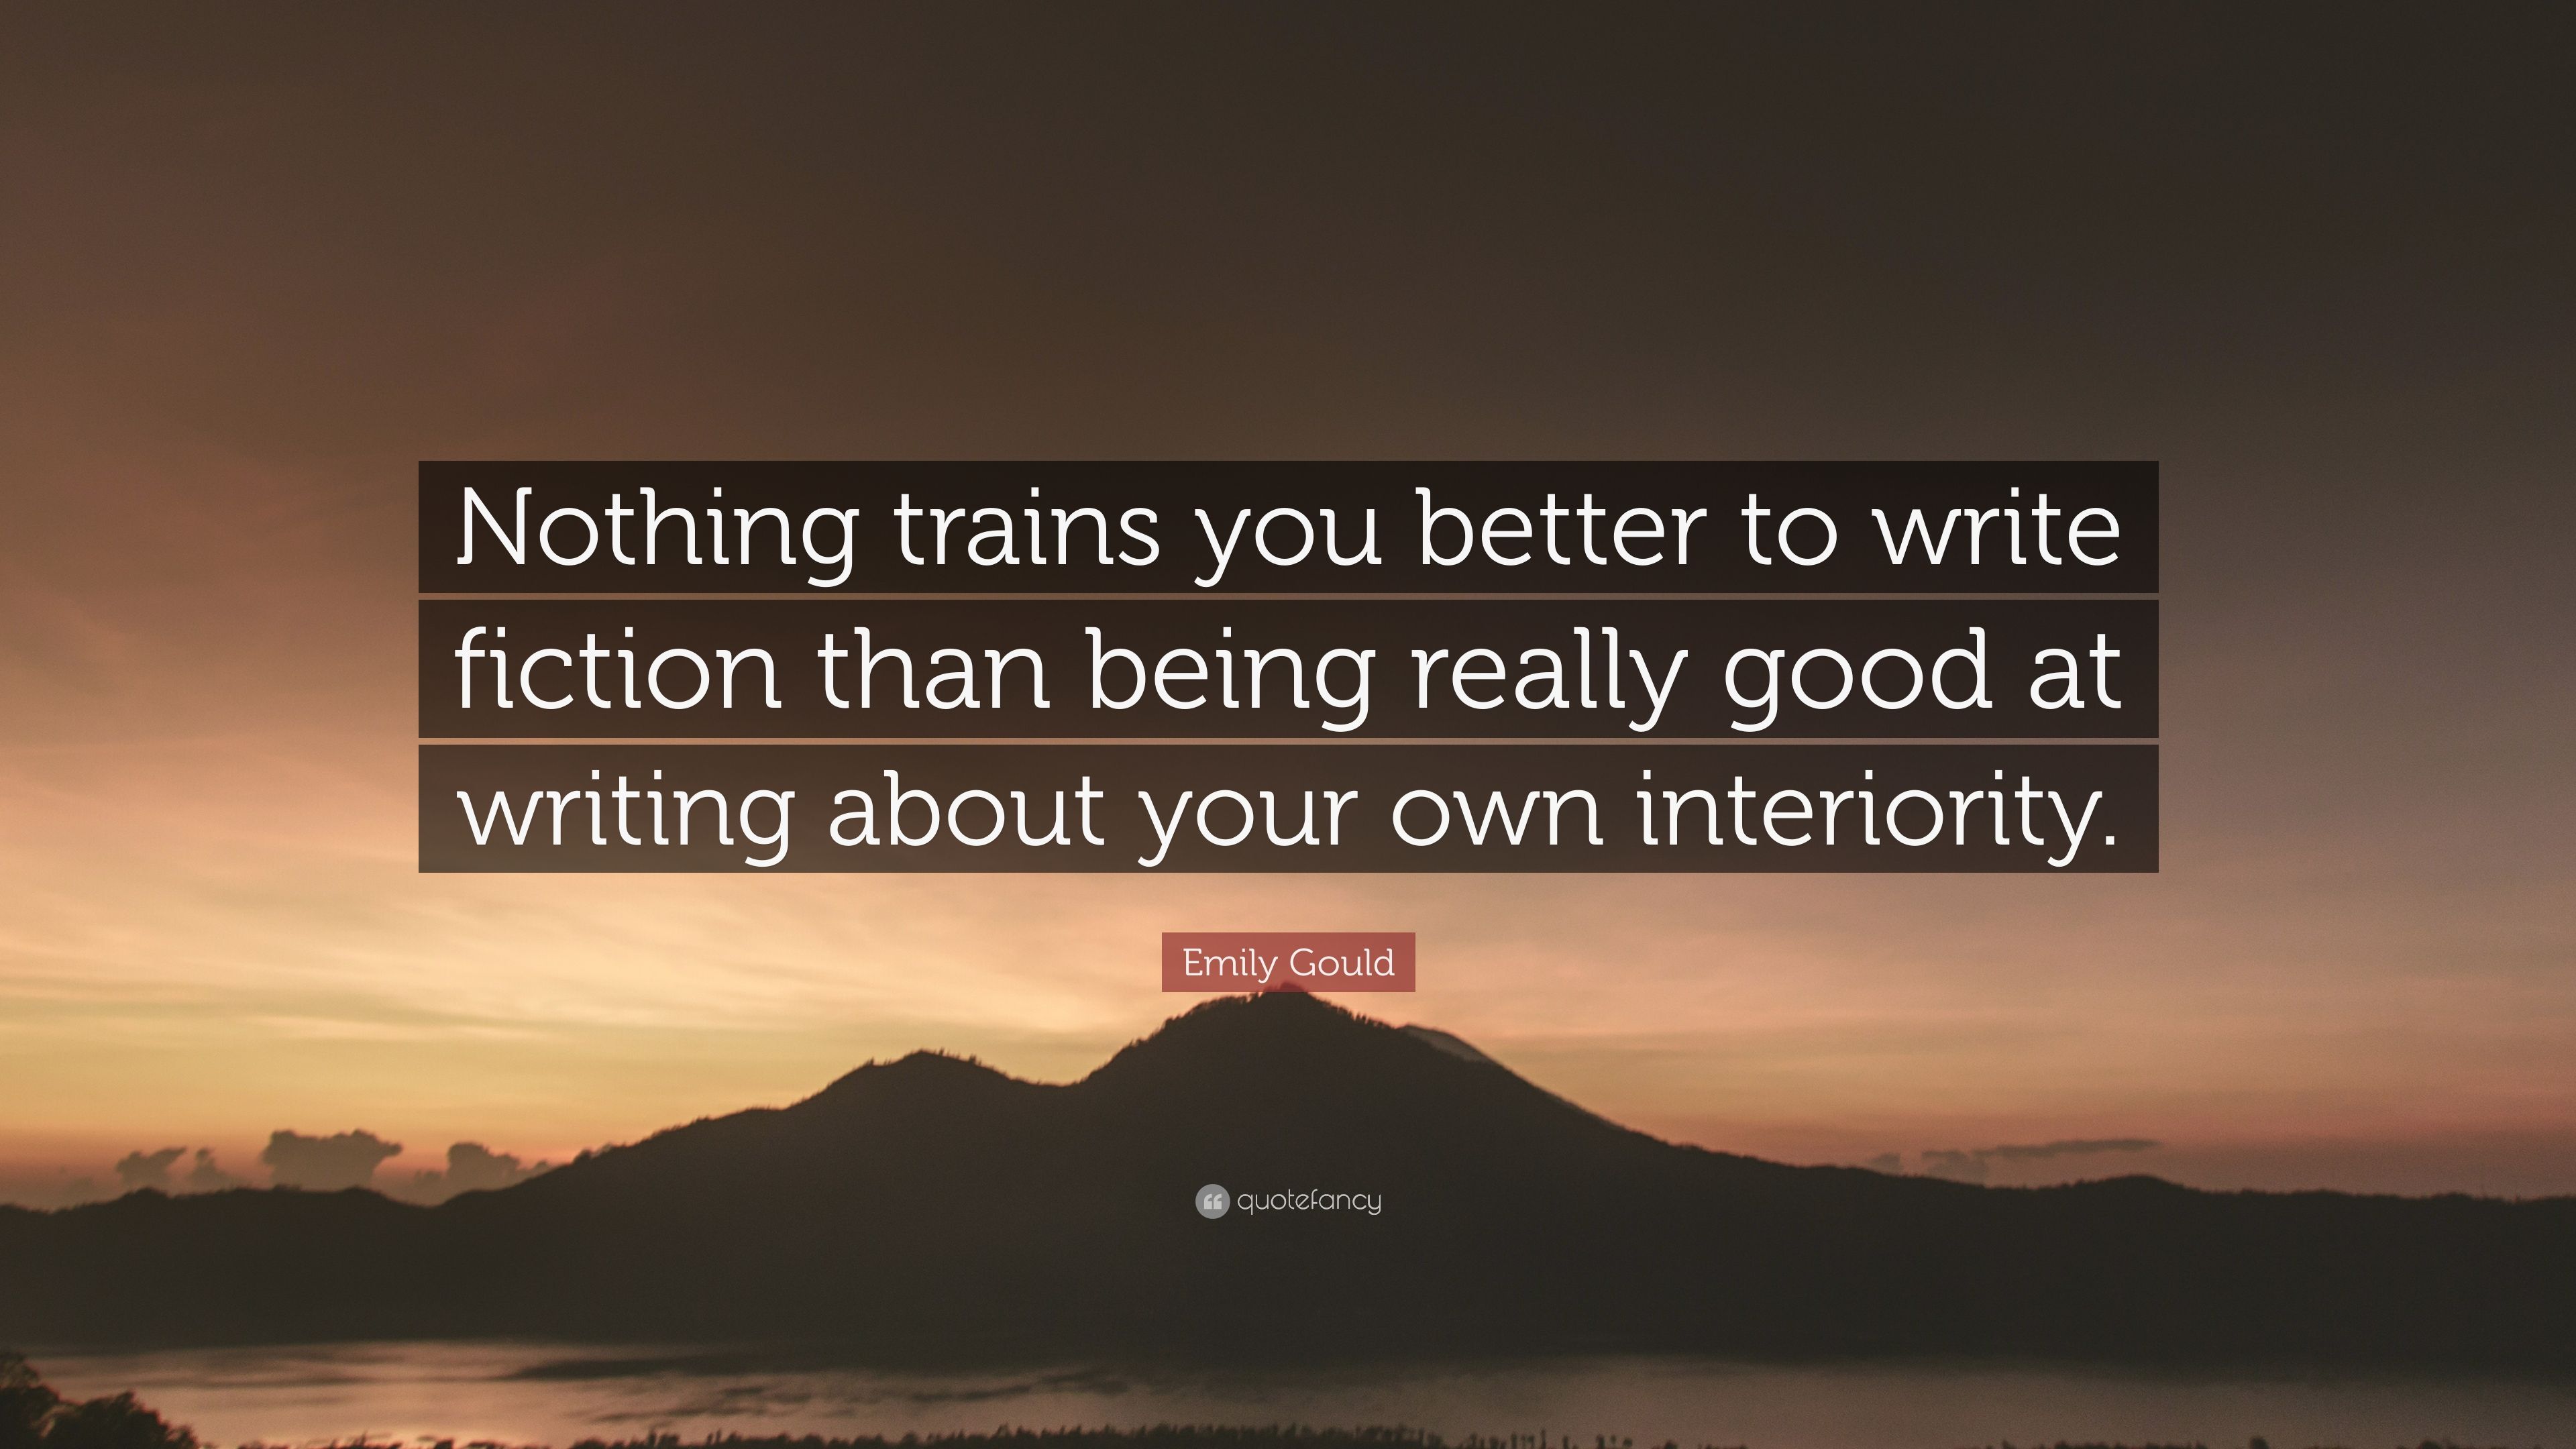 Emily Gould Quote: "Nothing trains you better to write fiction than be...